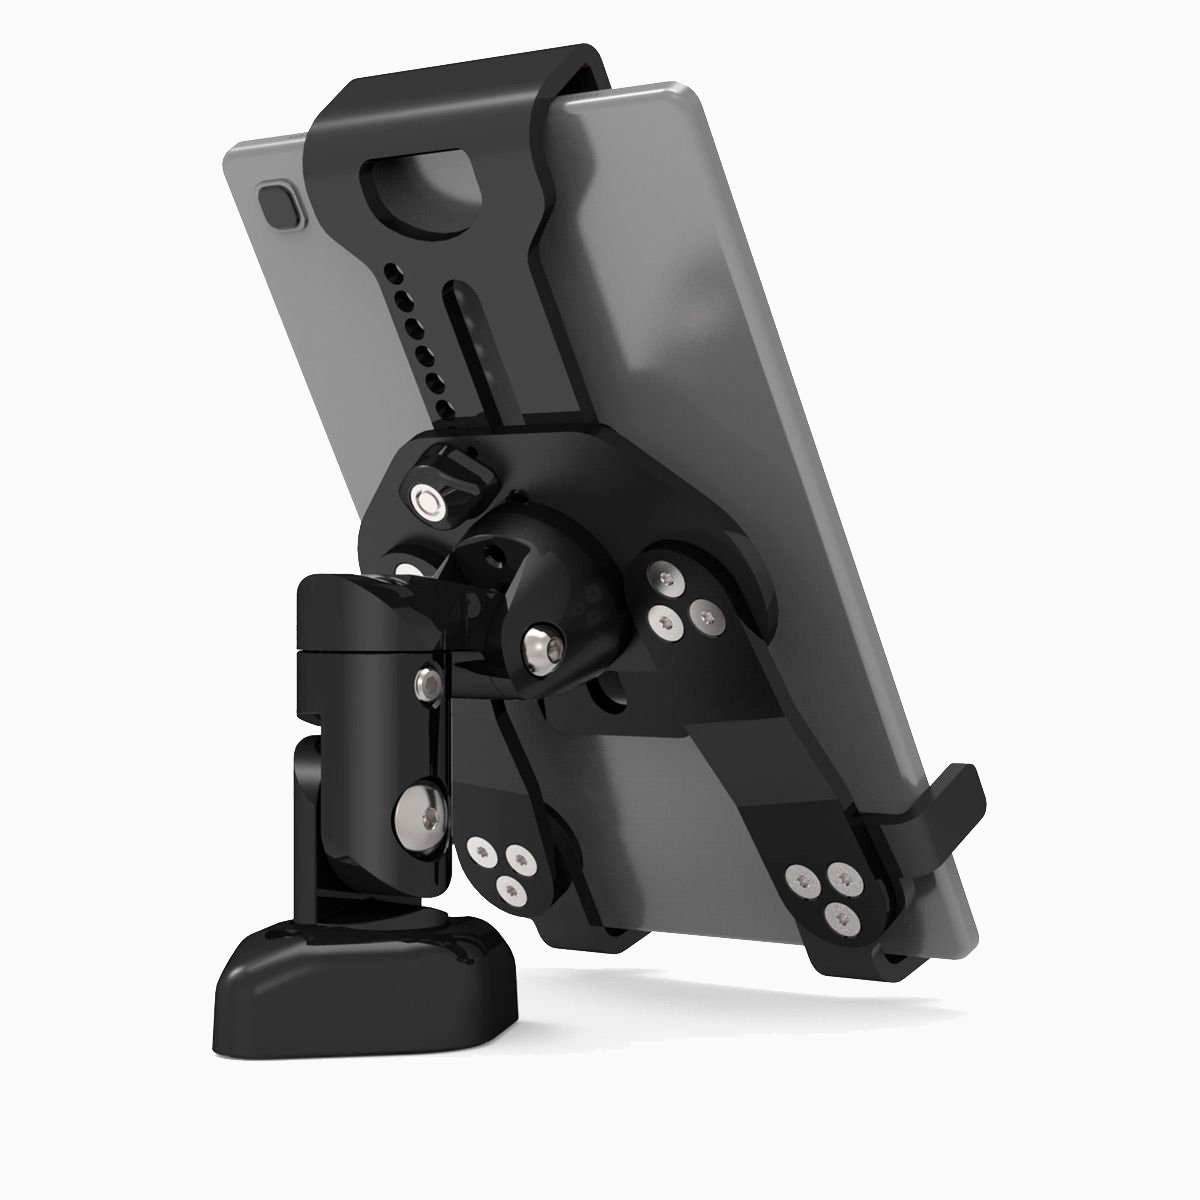 Maclocks Tablet Rugged Cases Locking Stand